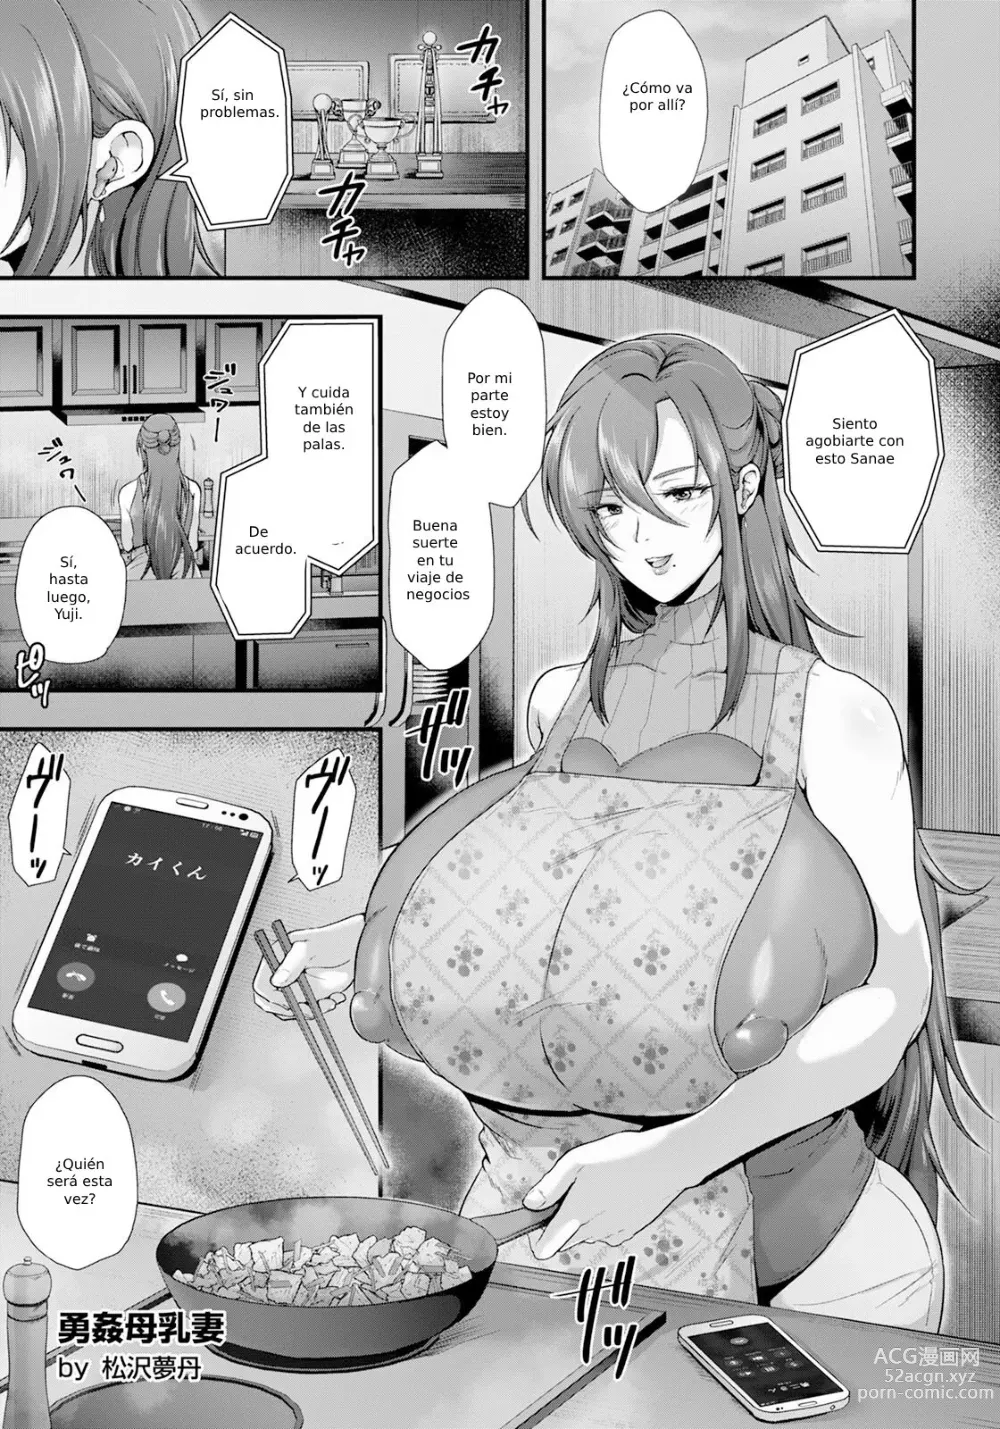 Page 5 of manga The Brave Mother's Breastfeeding Wife